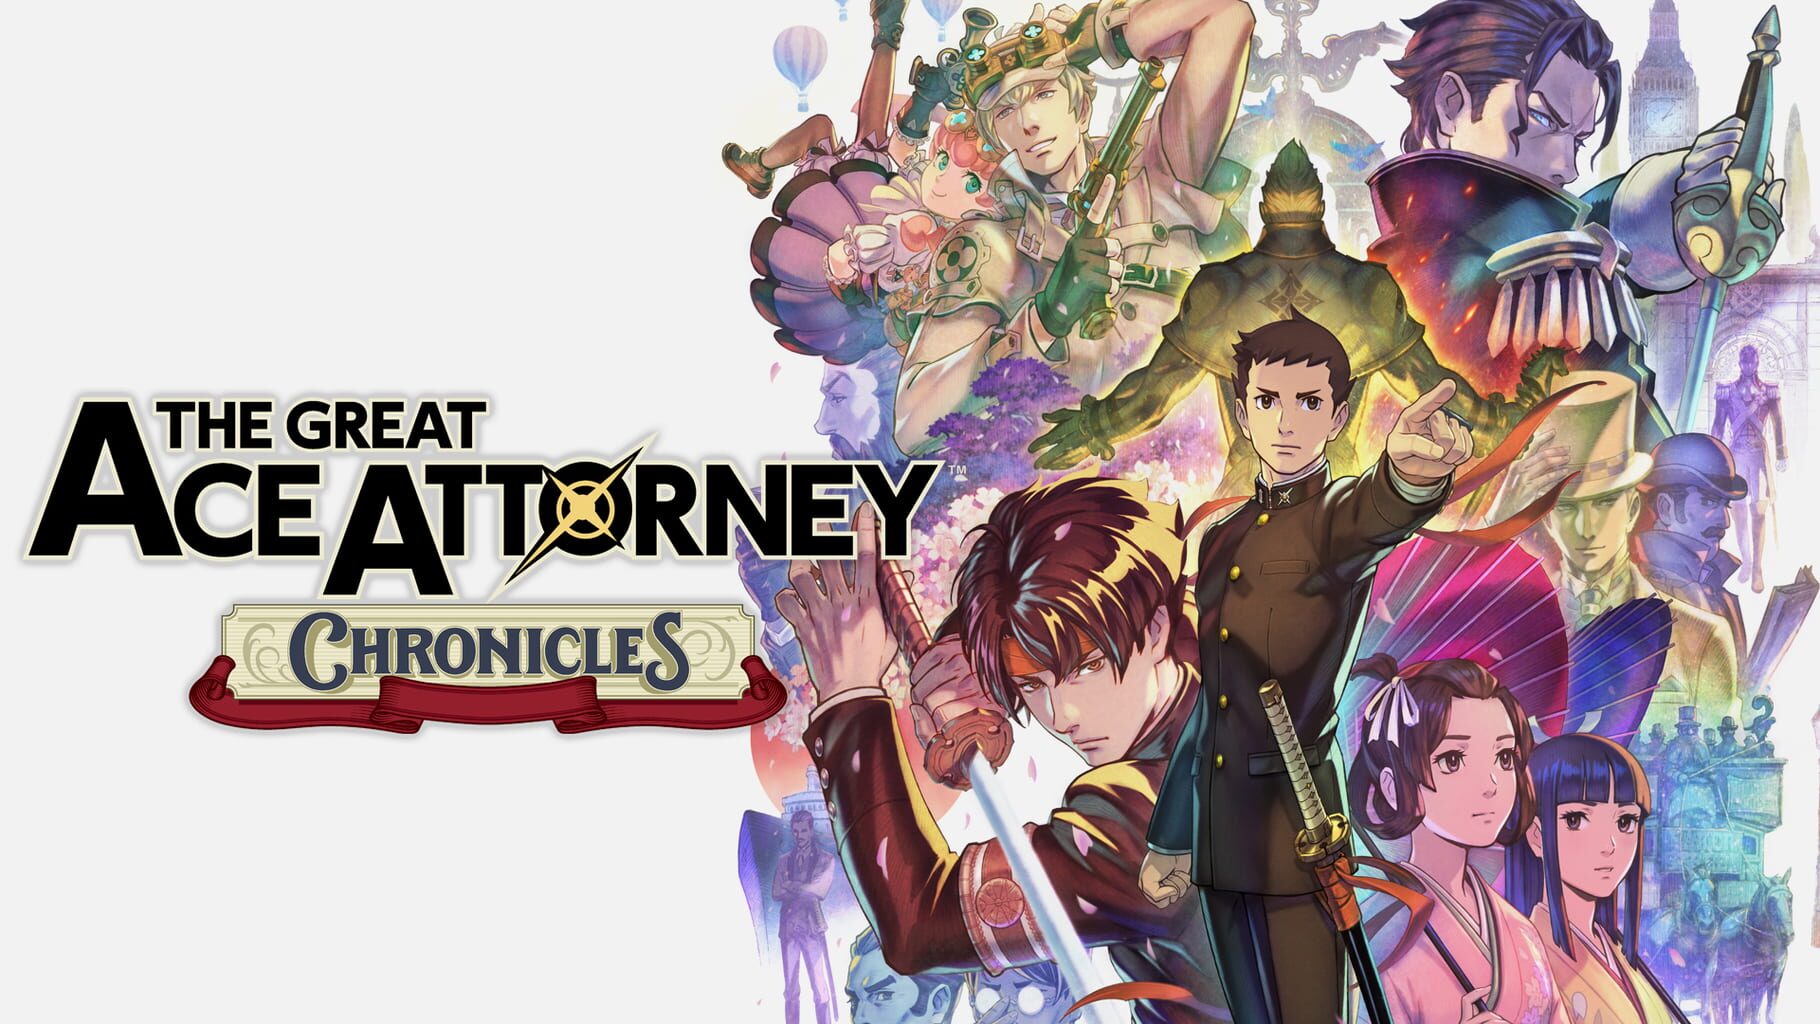 Artwork for The Great Ace Attorney Chronicles